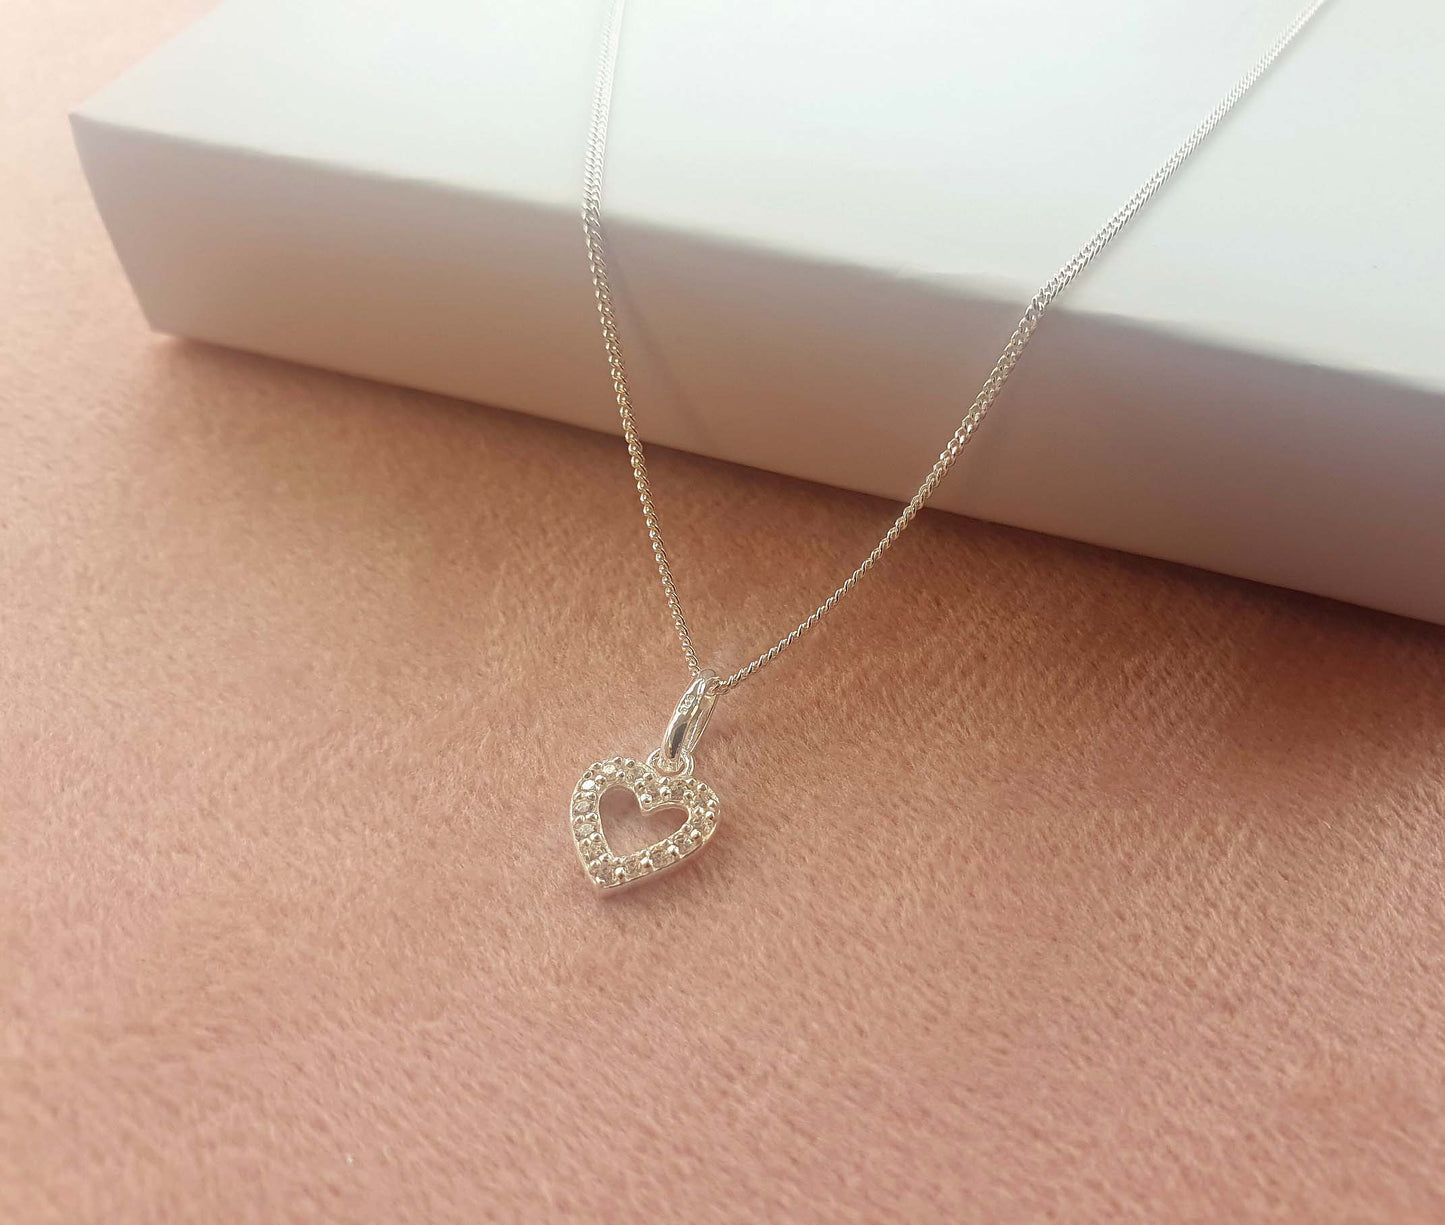 Best Friend Heart Necklace with Cubic Zirconia in Sterling Silver 925, Personalised Gift